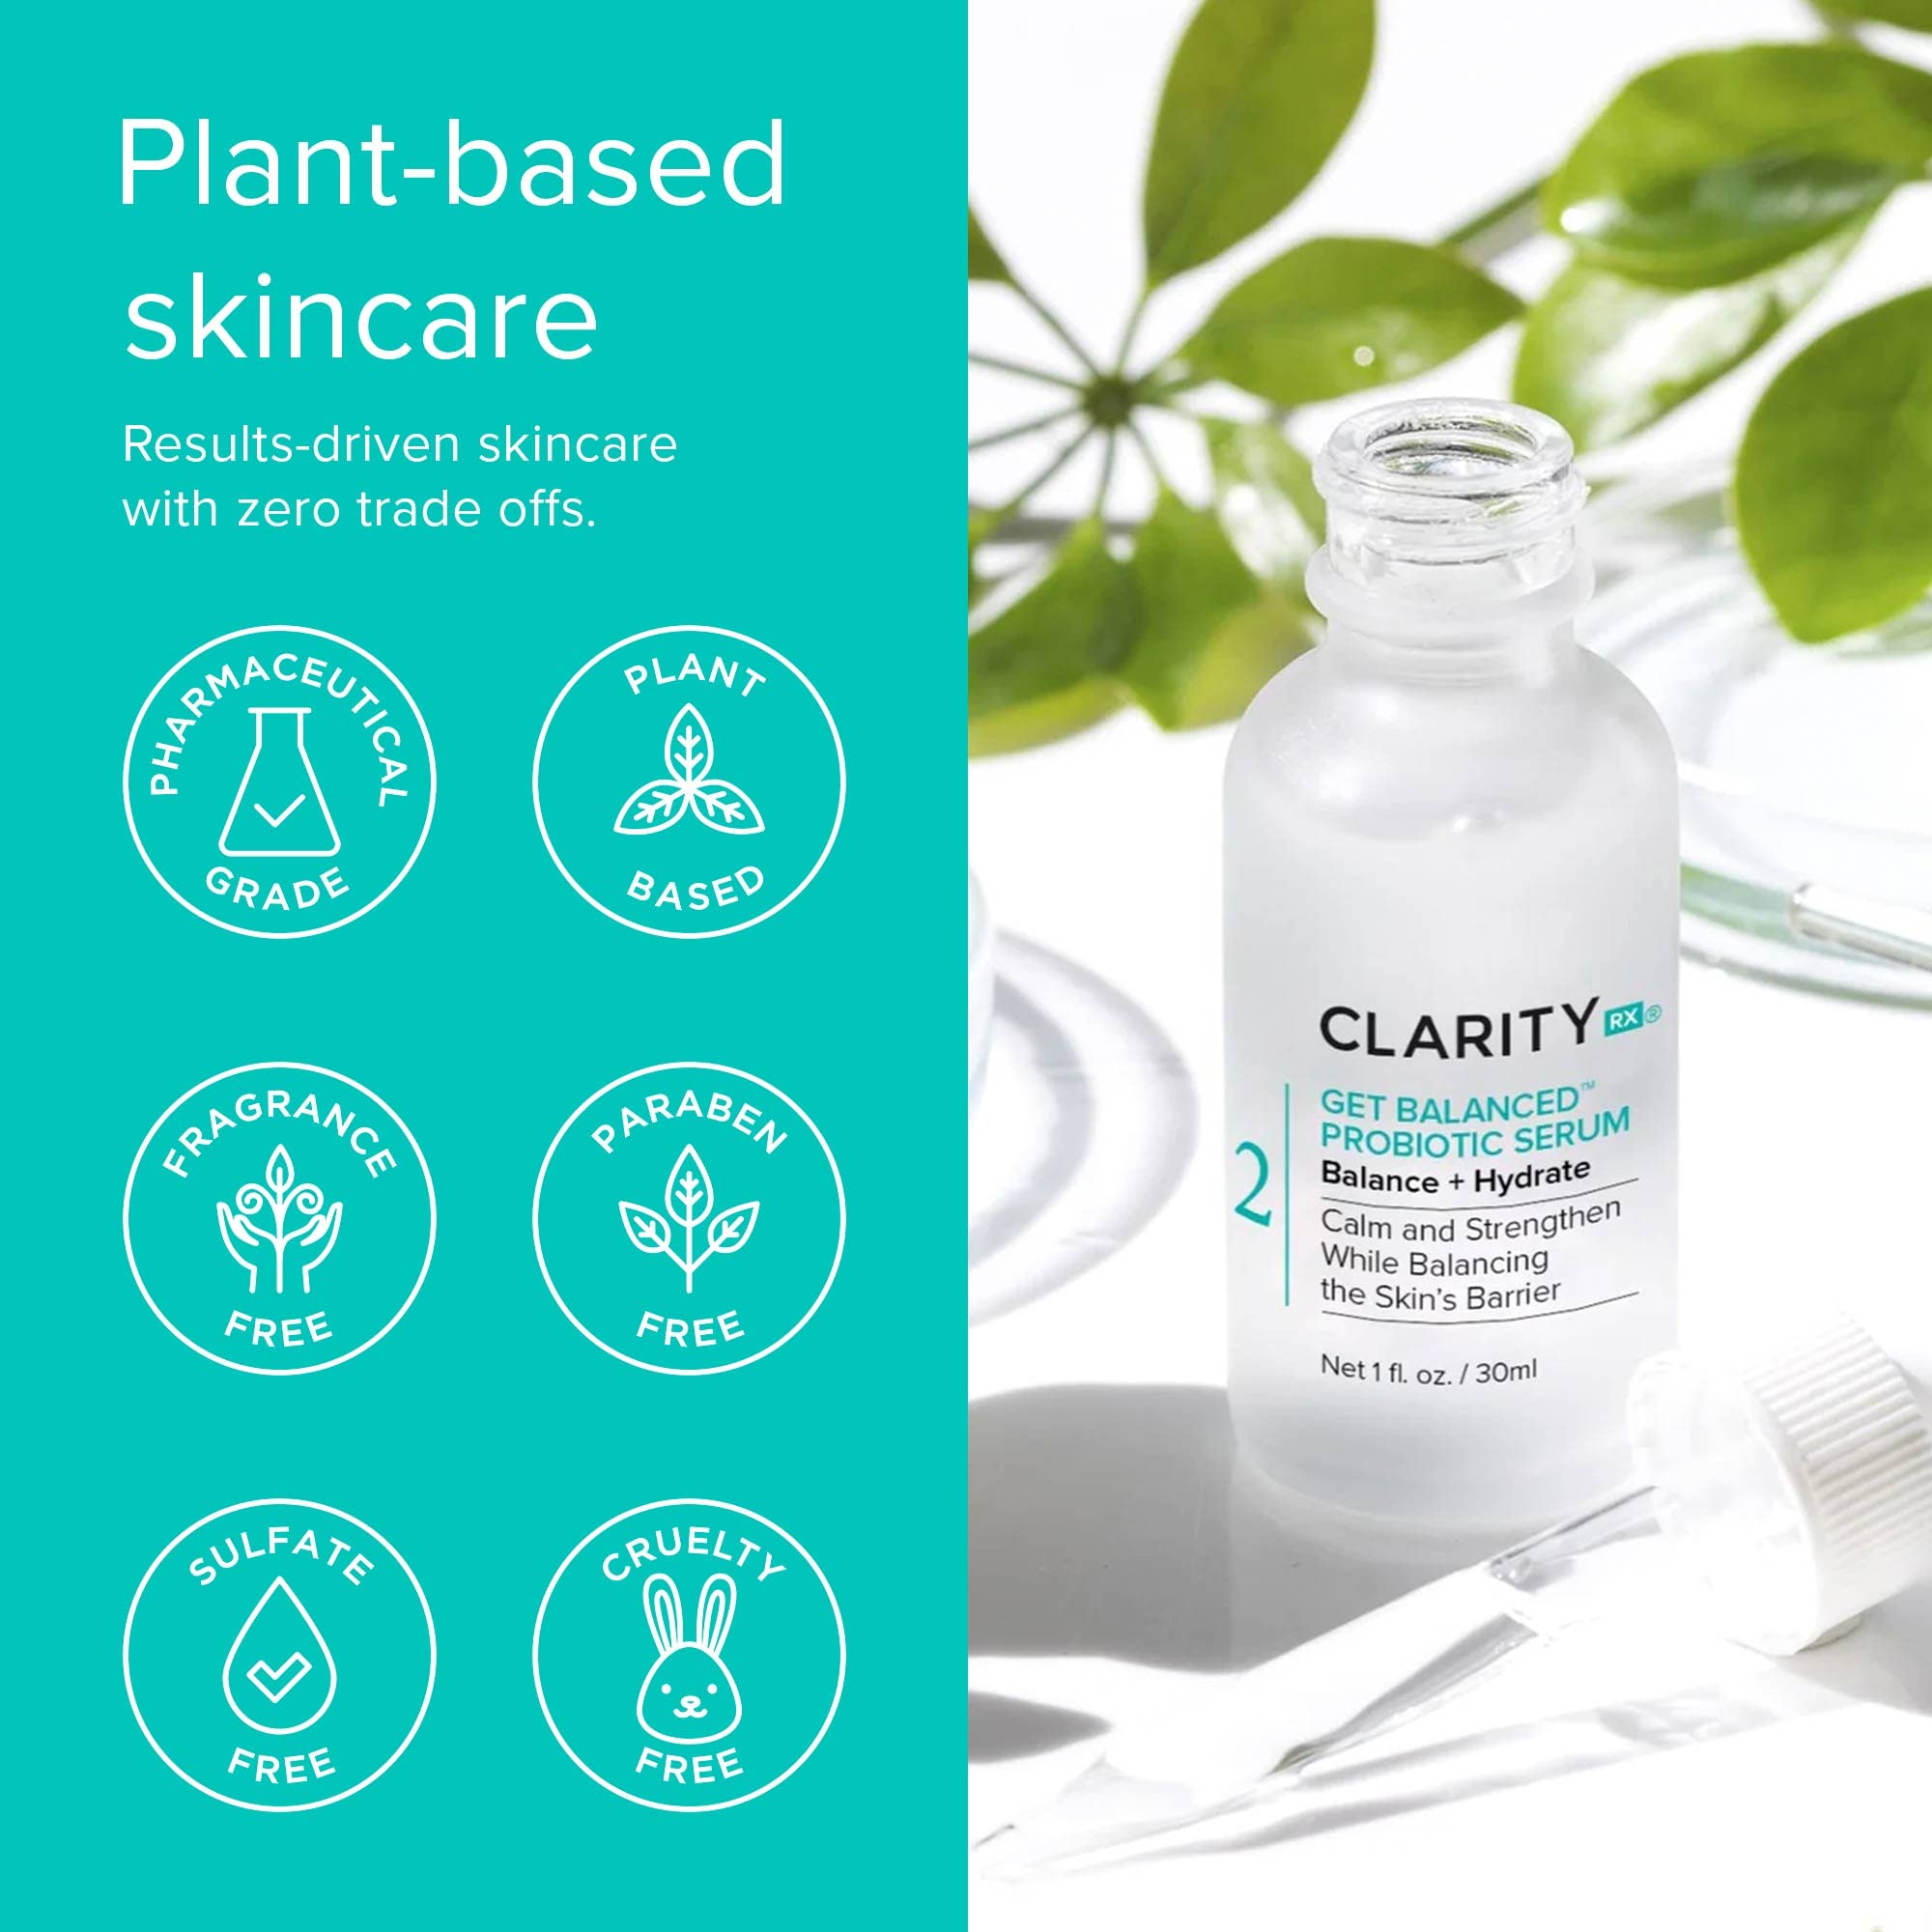 ClarityRx Get Balanced Probiotic Hydrating Face Serum, Natural Plant-Based Skin-Balancing Treatment with Hyaluronic Acid & Antioxidants for Normal & Aging Skin (1 fl oz)